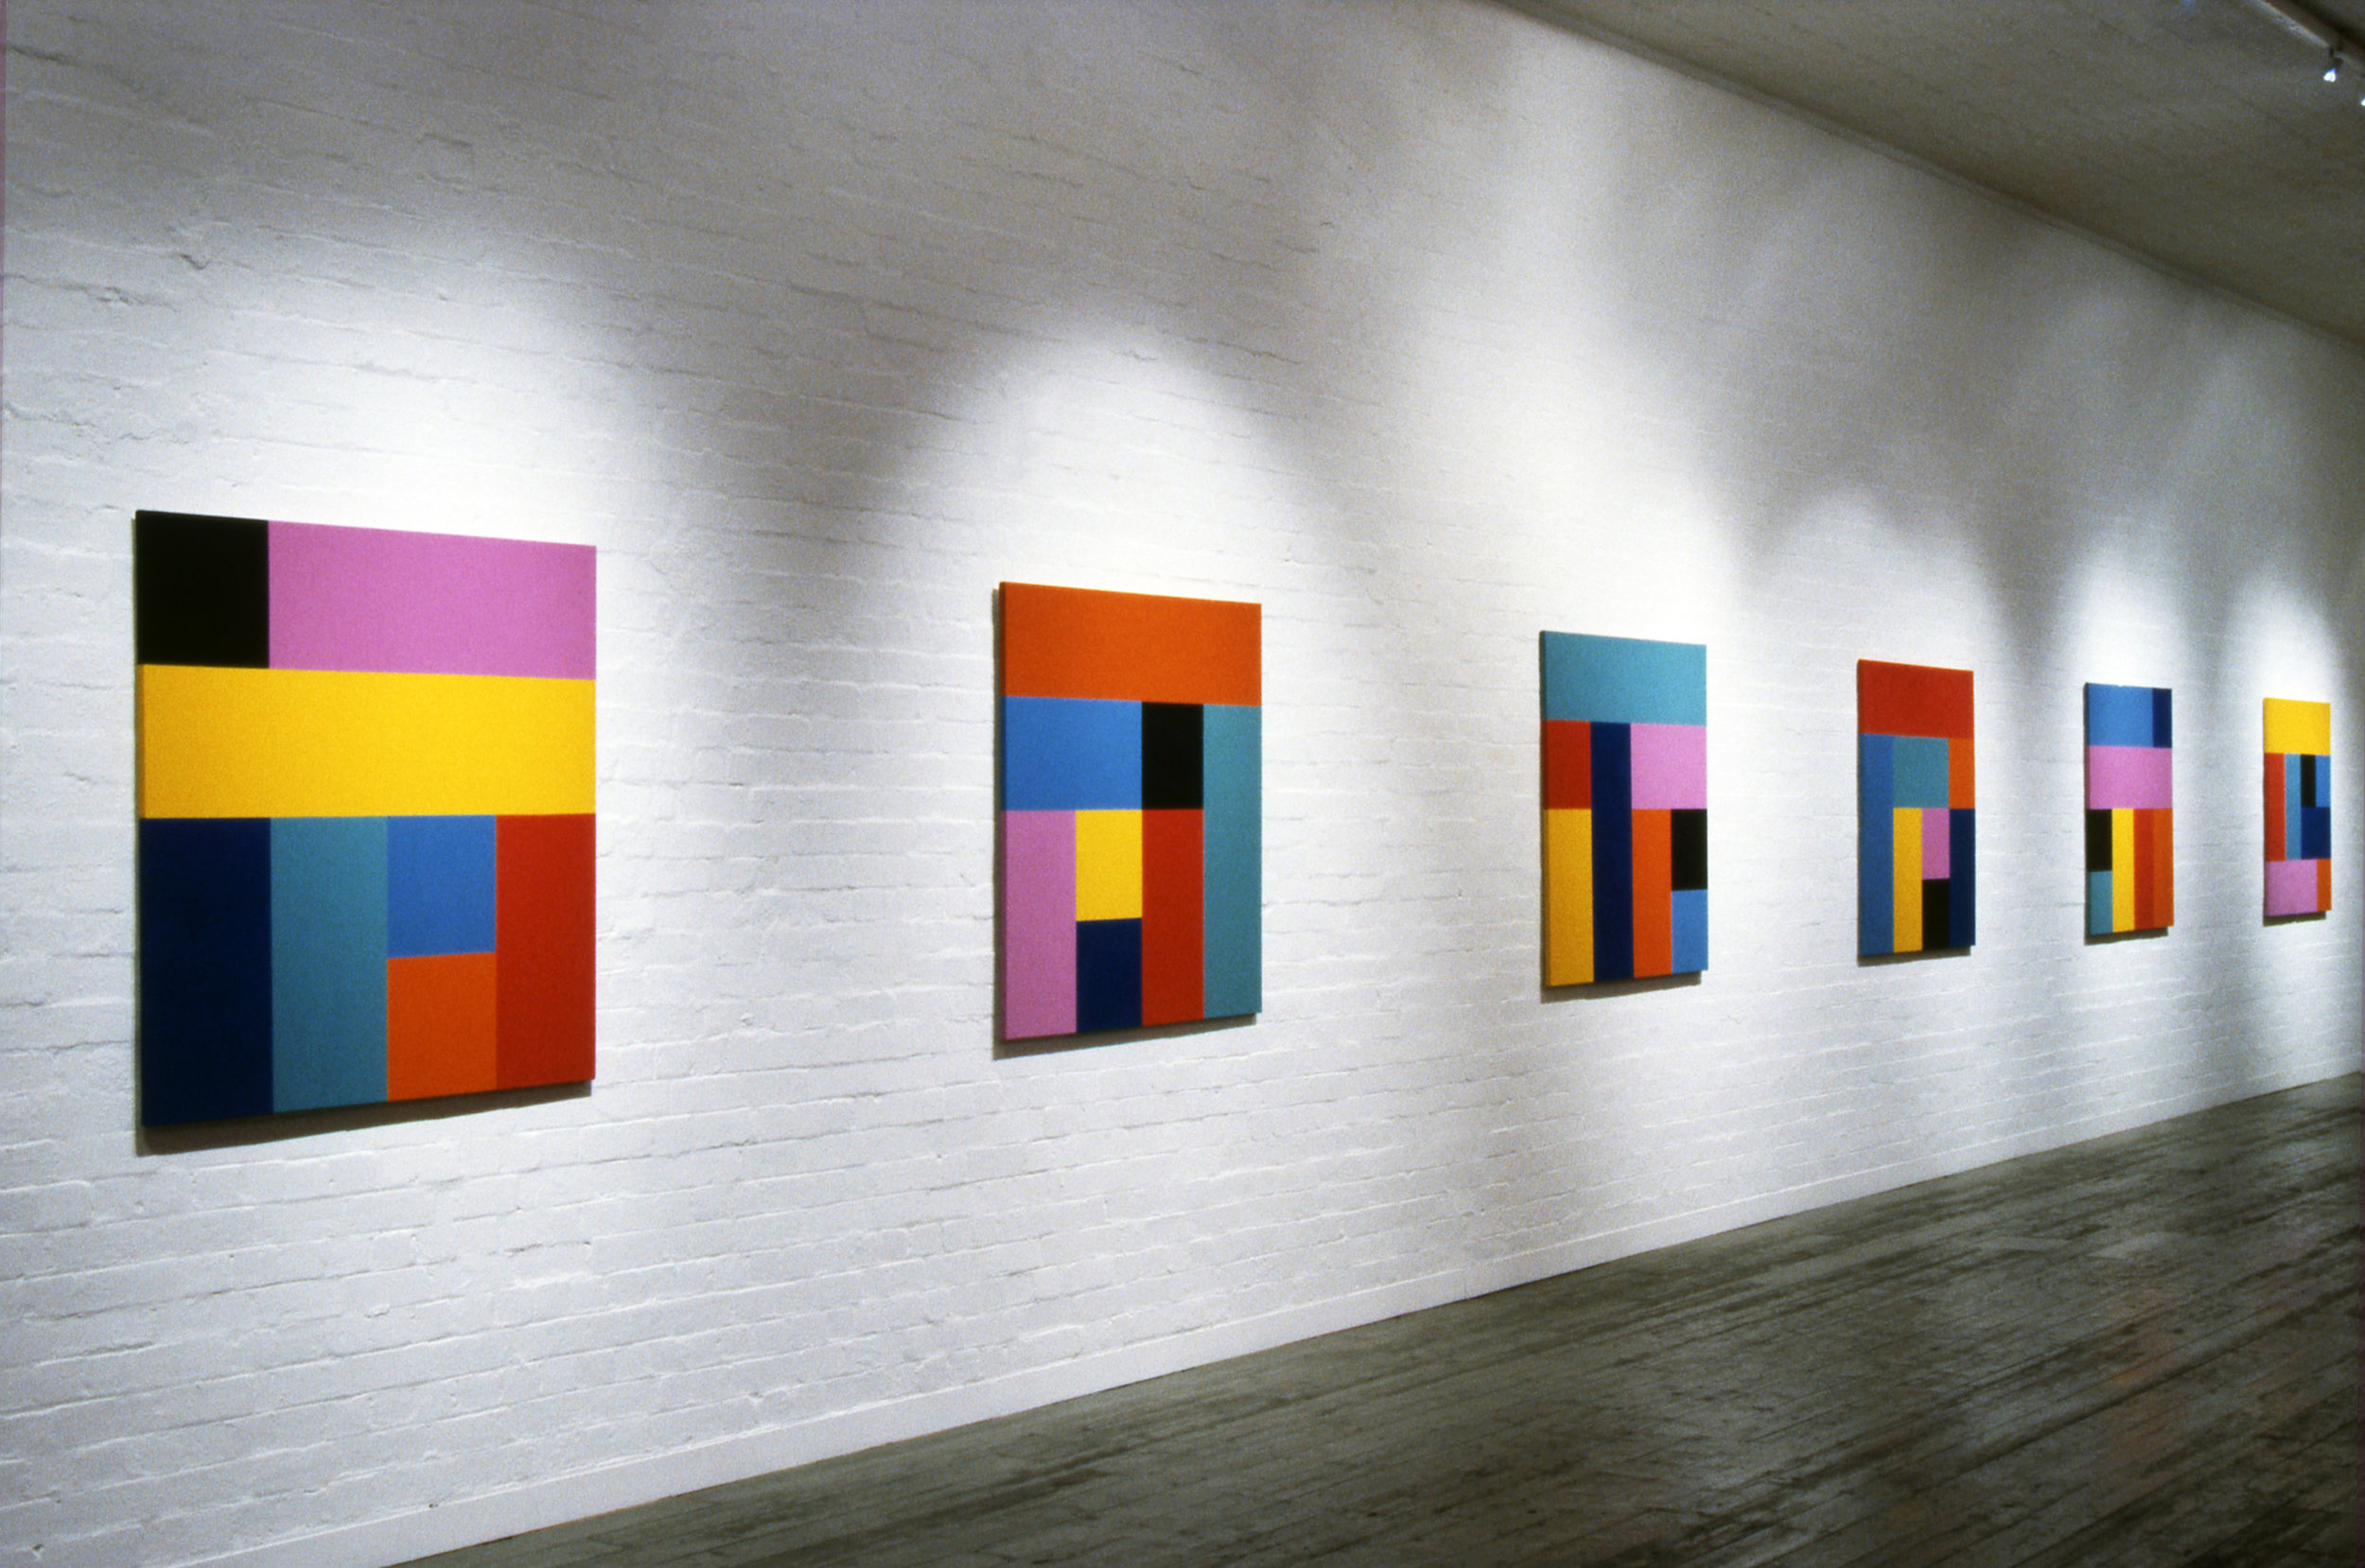  Sunrise, 1993, Synthetic polymer paint on canvas, 122 x 122cm, City Gallery, Melbourne.&nbsp; 